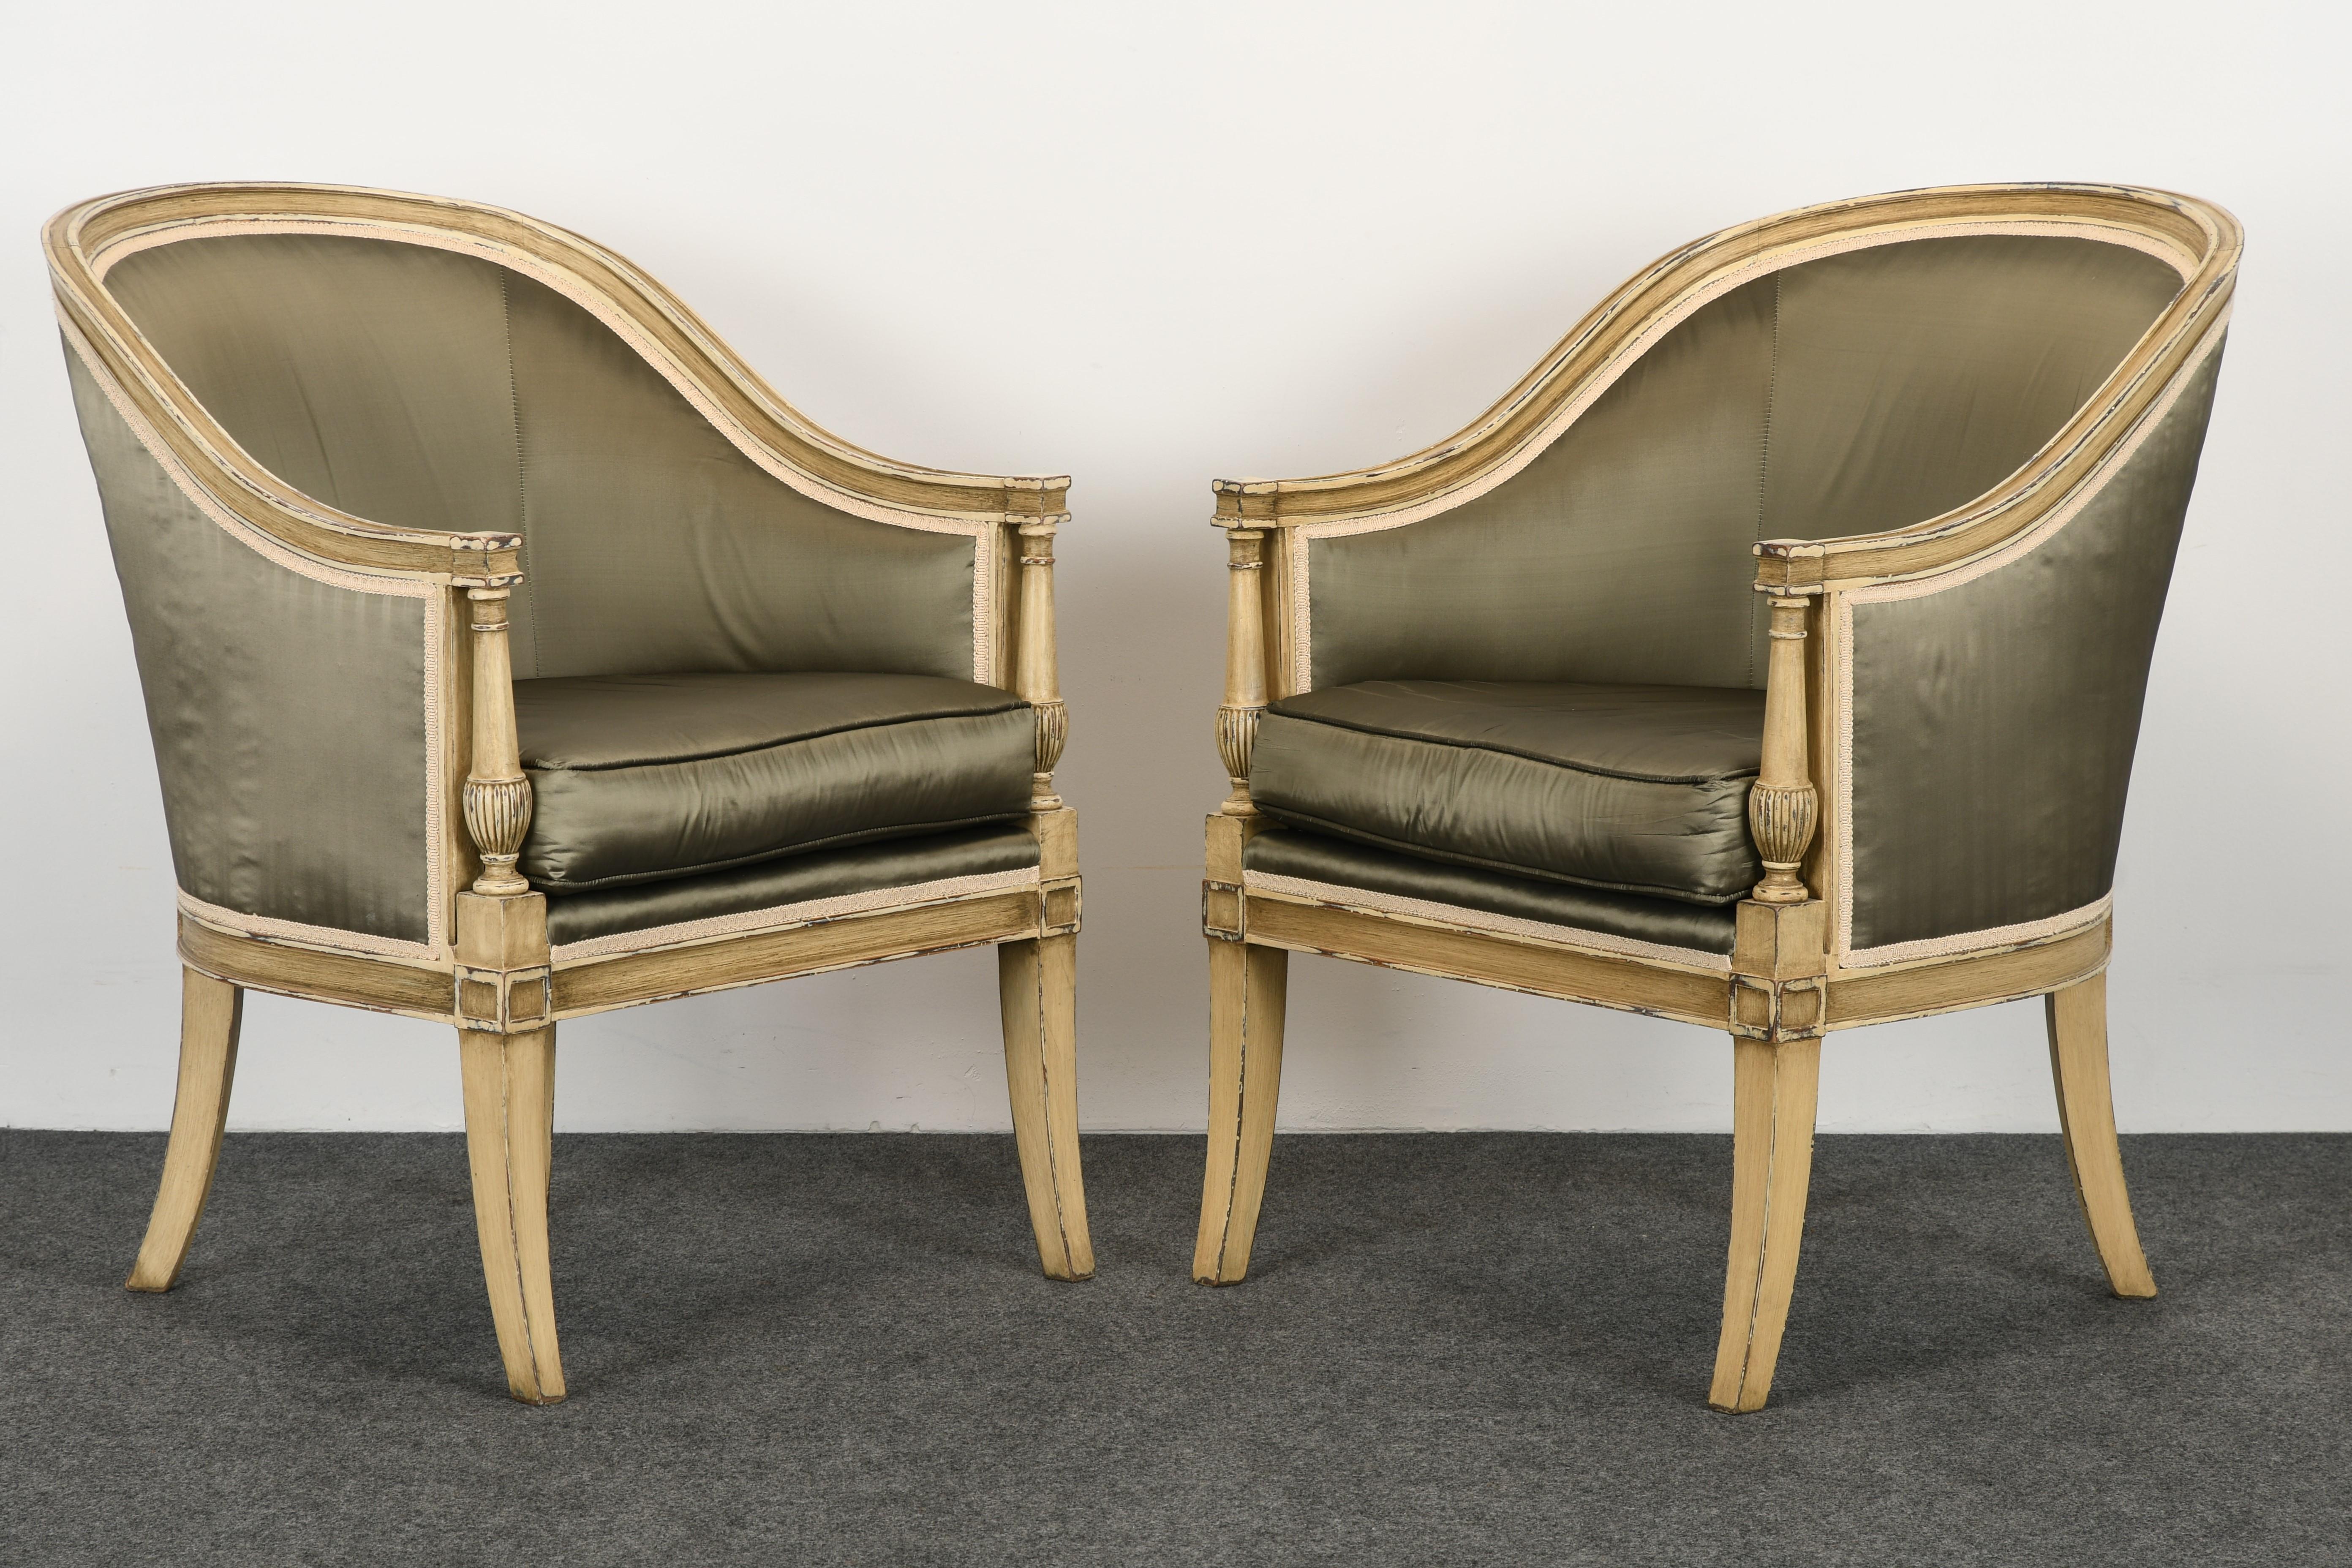 A beautiful large-scale pair of Gustavian painted barrel back chairs in the manner of Nierman Weeks. This stunning pair of Klismos style armchairs have a pleasing distressed finish with a Directoire decorative arm. These chairs are sturdy and